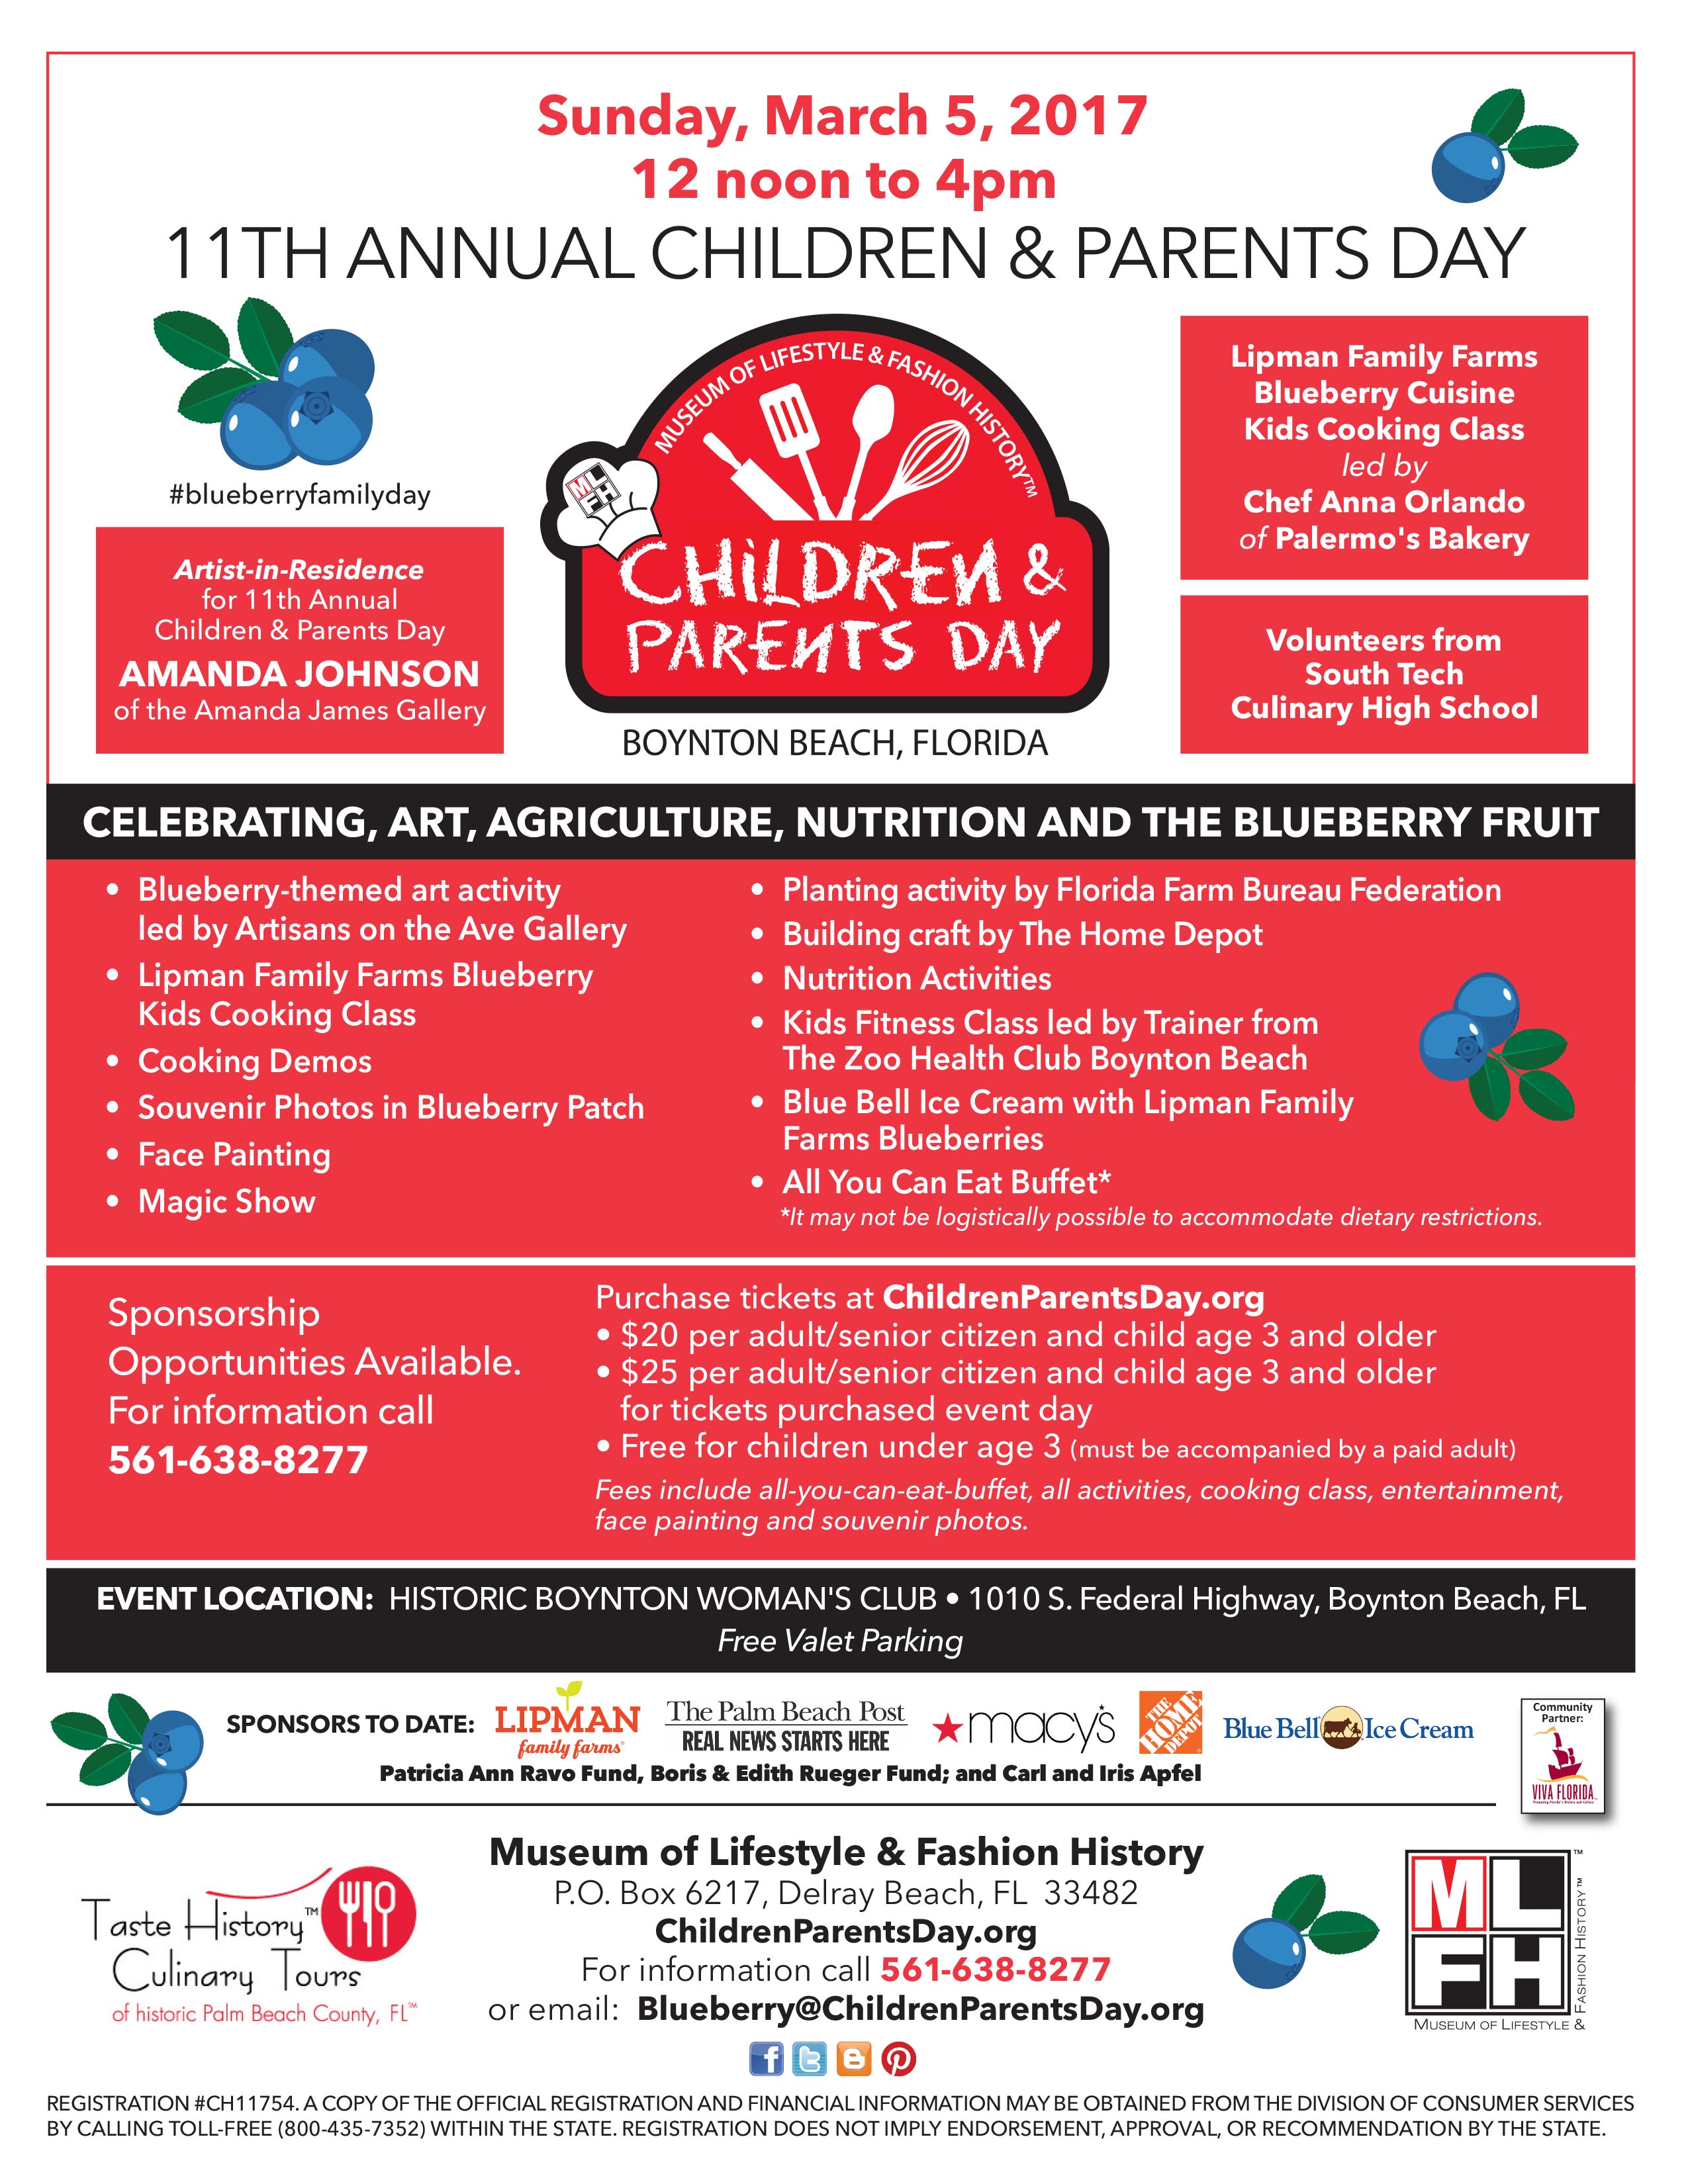 11th annual Children & Parents Day Celebrating the Blueberry Fruit on Sunday, March 5, 2017